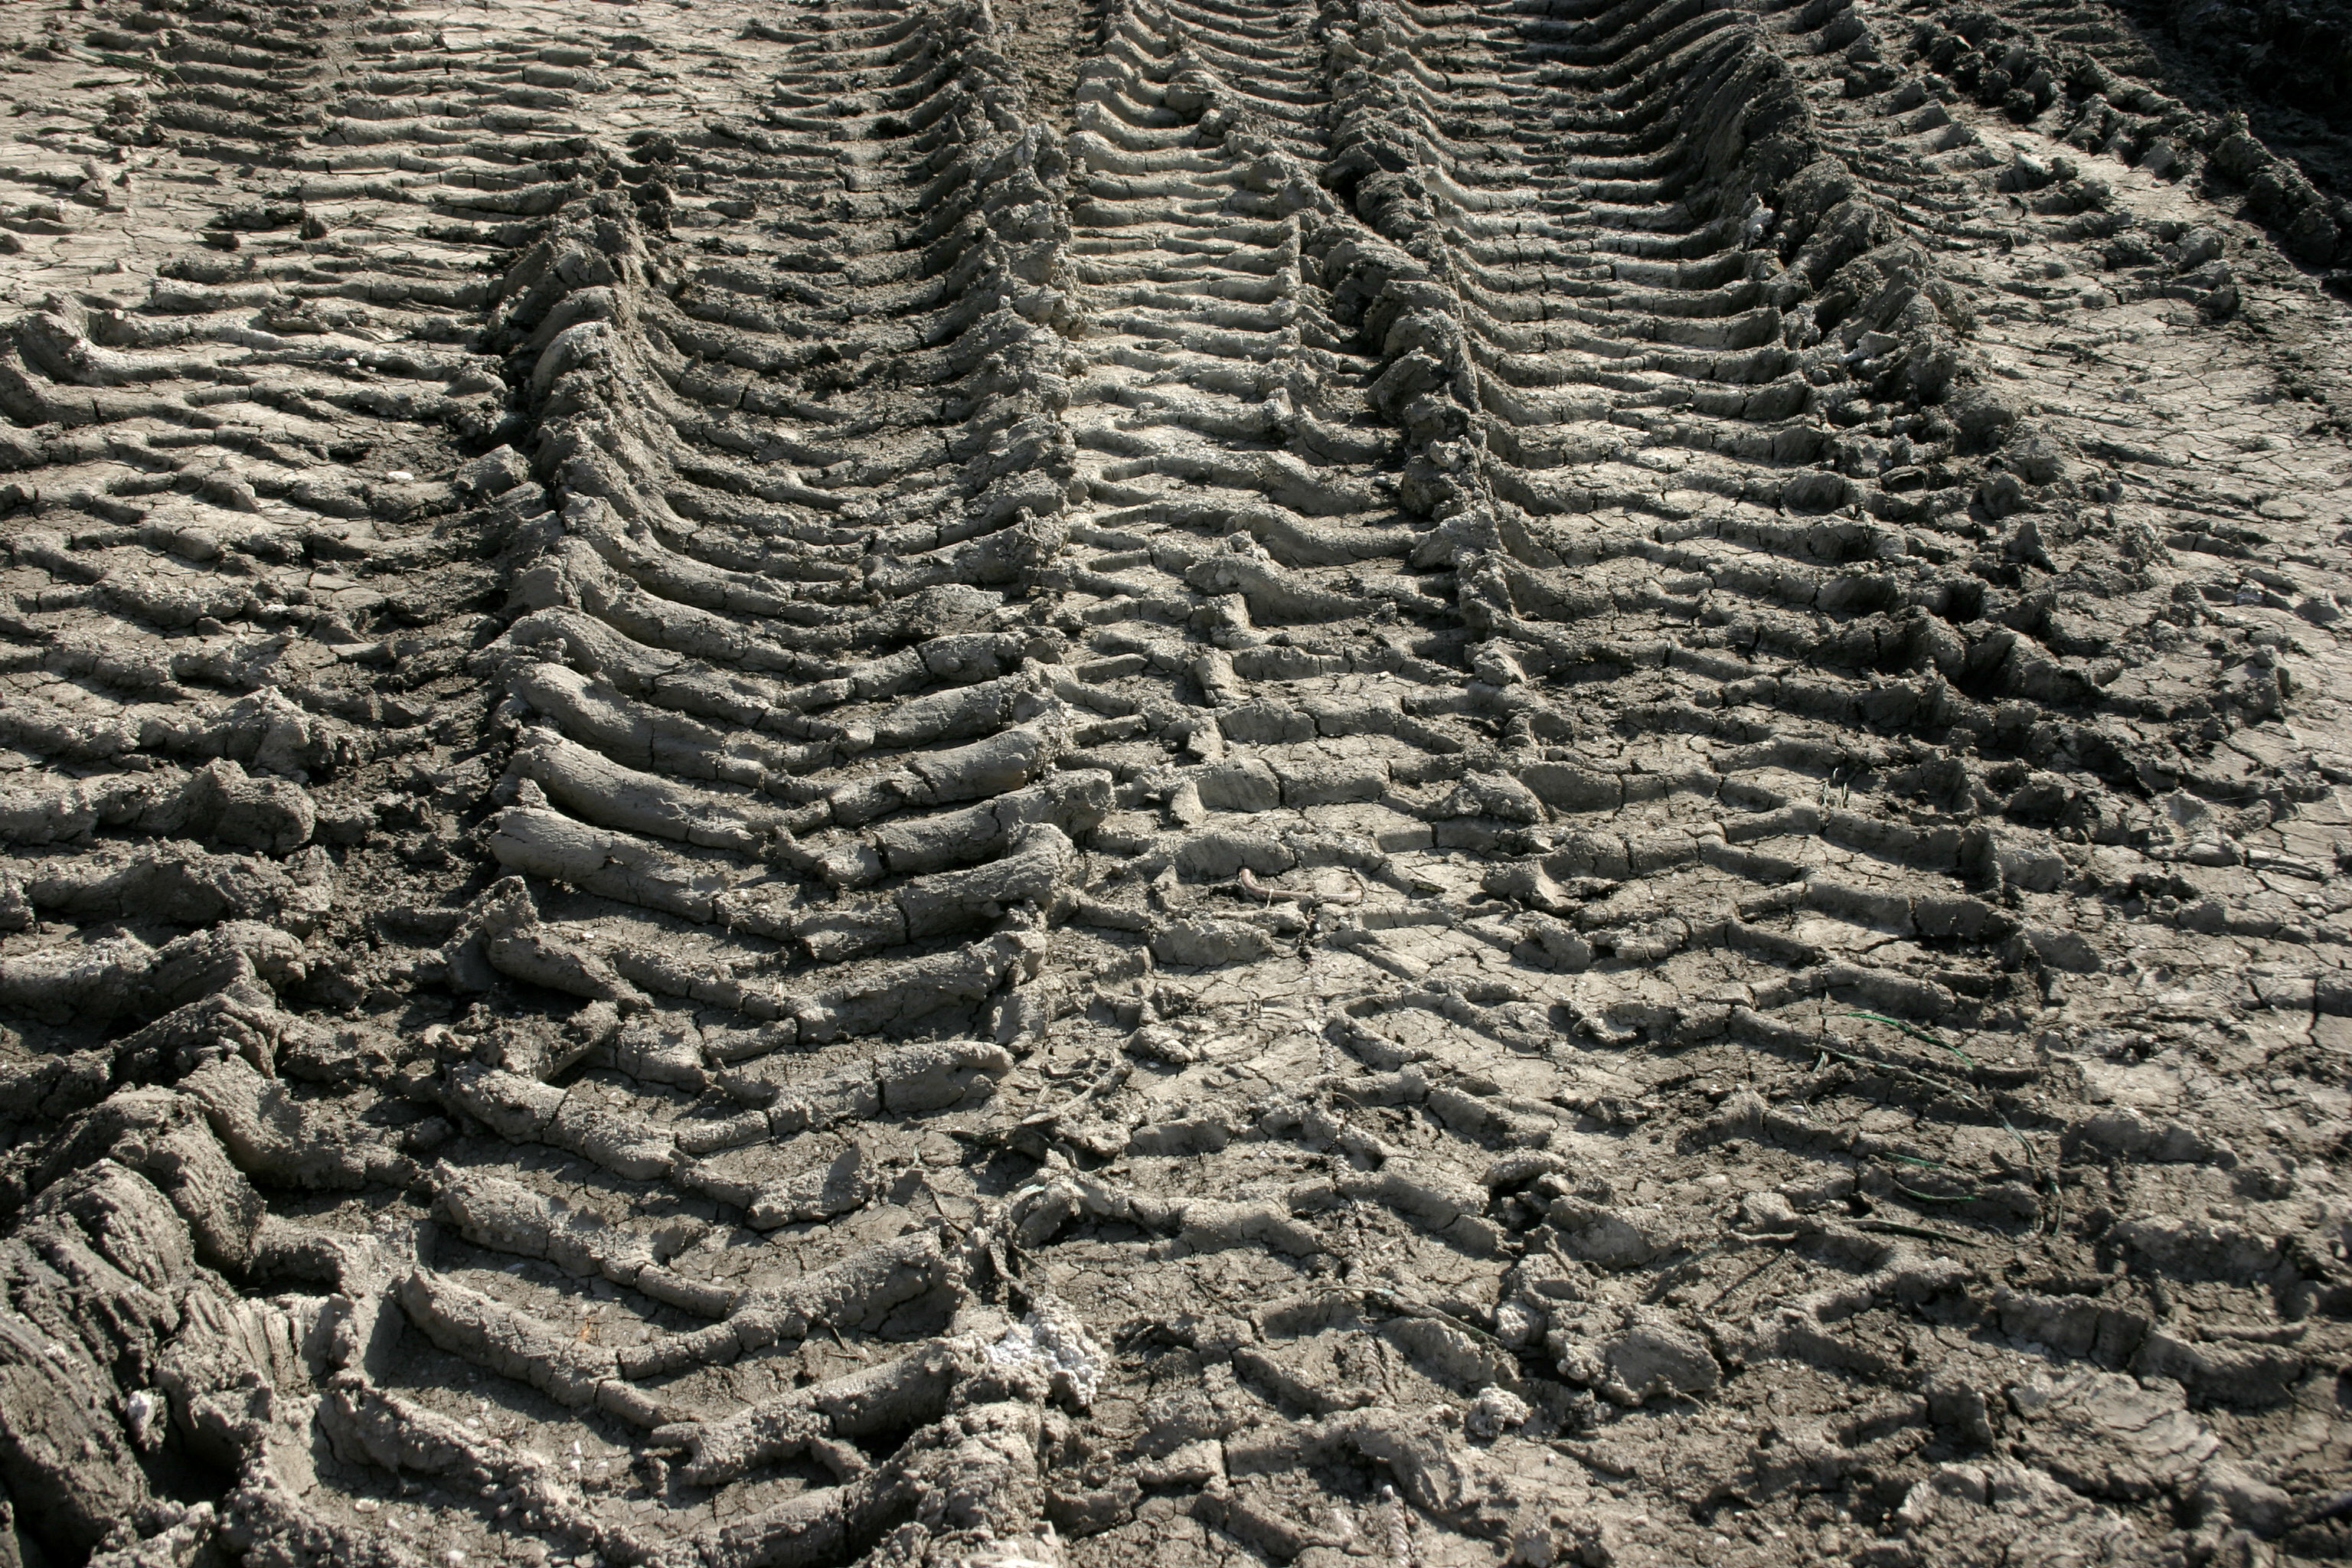 File:- Tire traces -.jpg - Wikimedia Commons